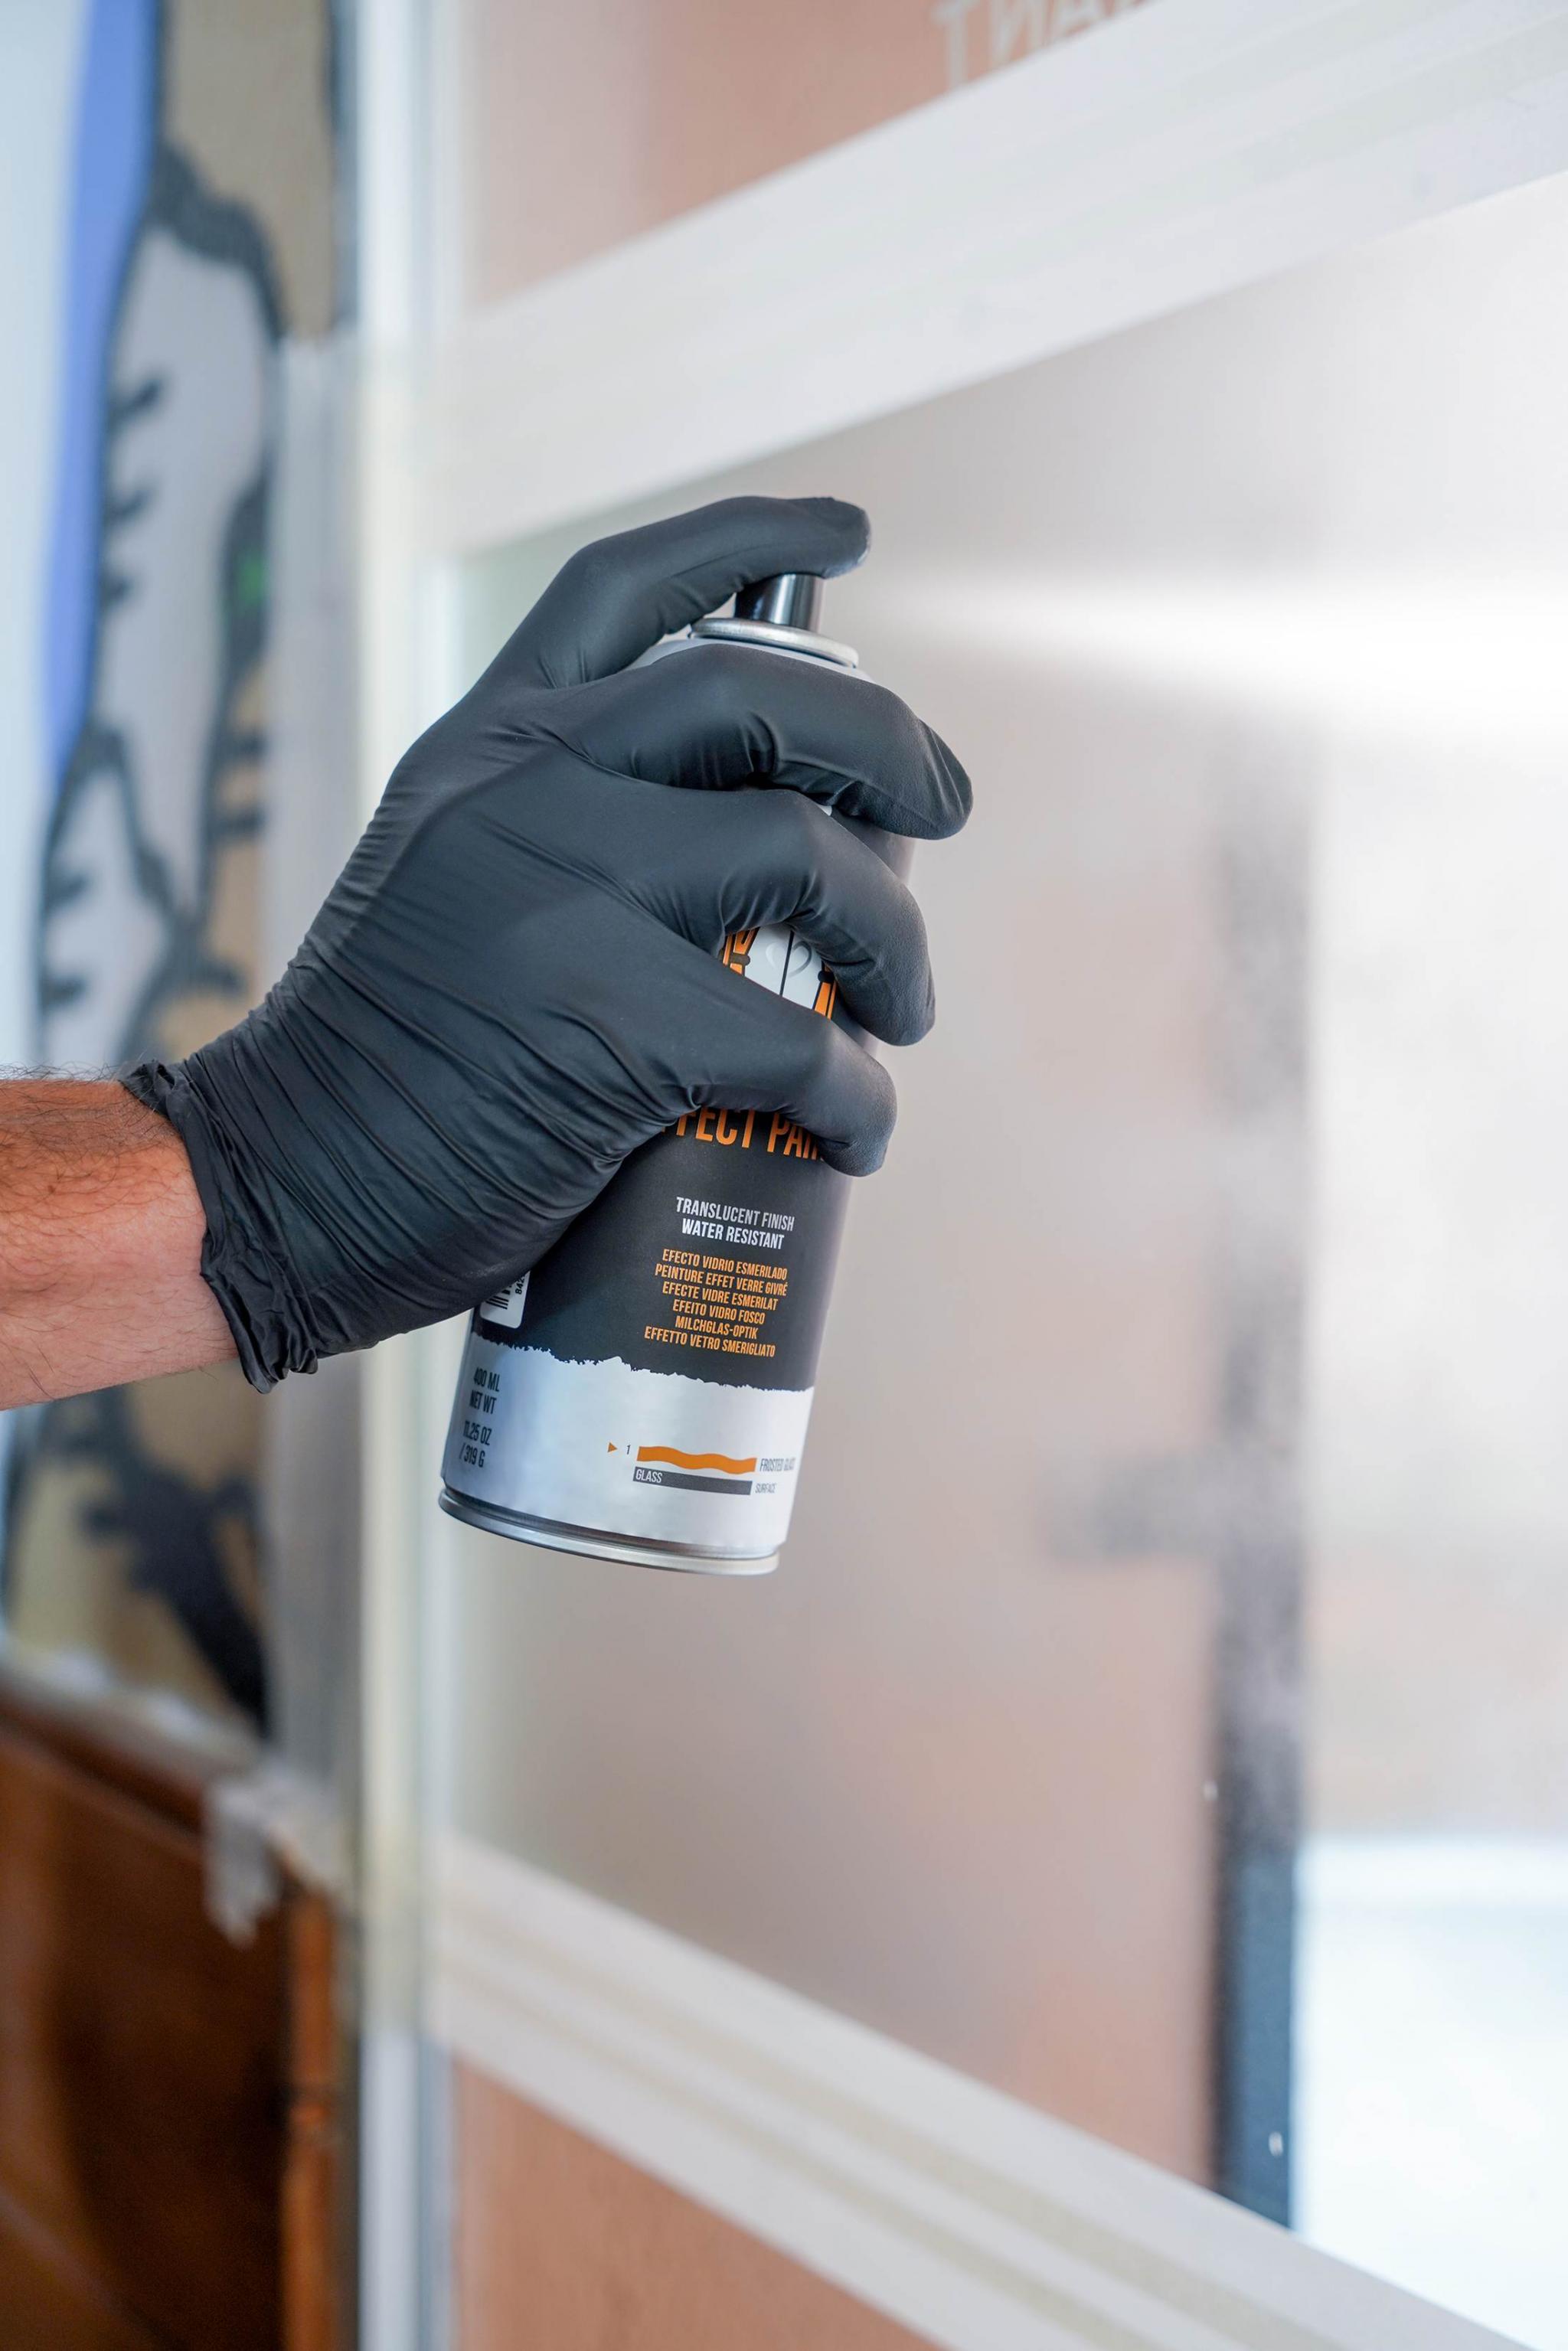 Spray adhesive: advantages and types - Montana Colors